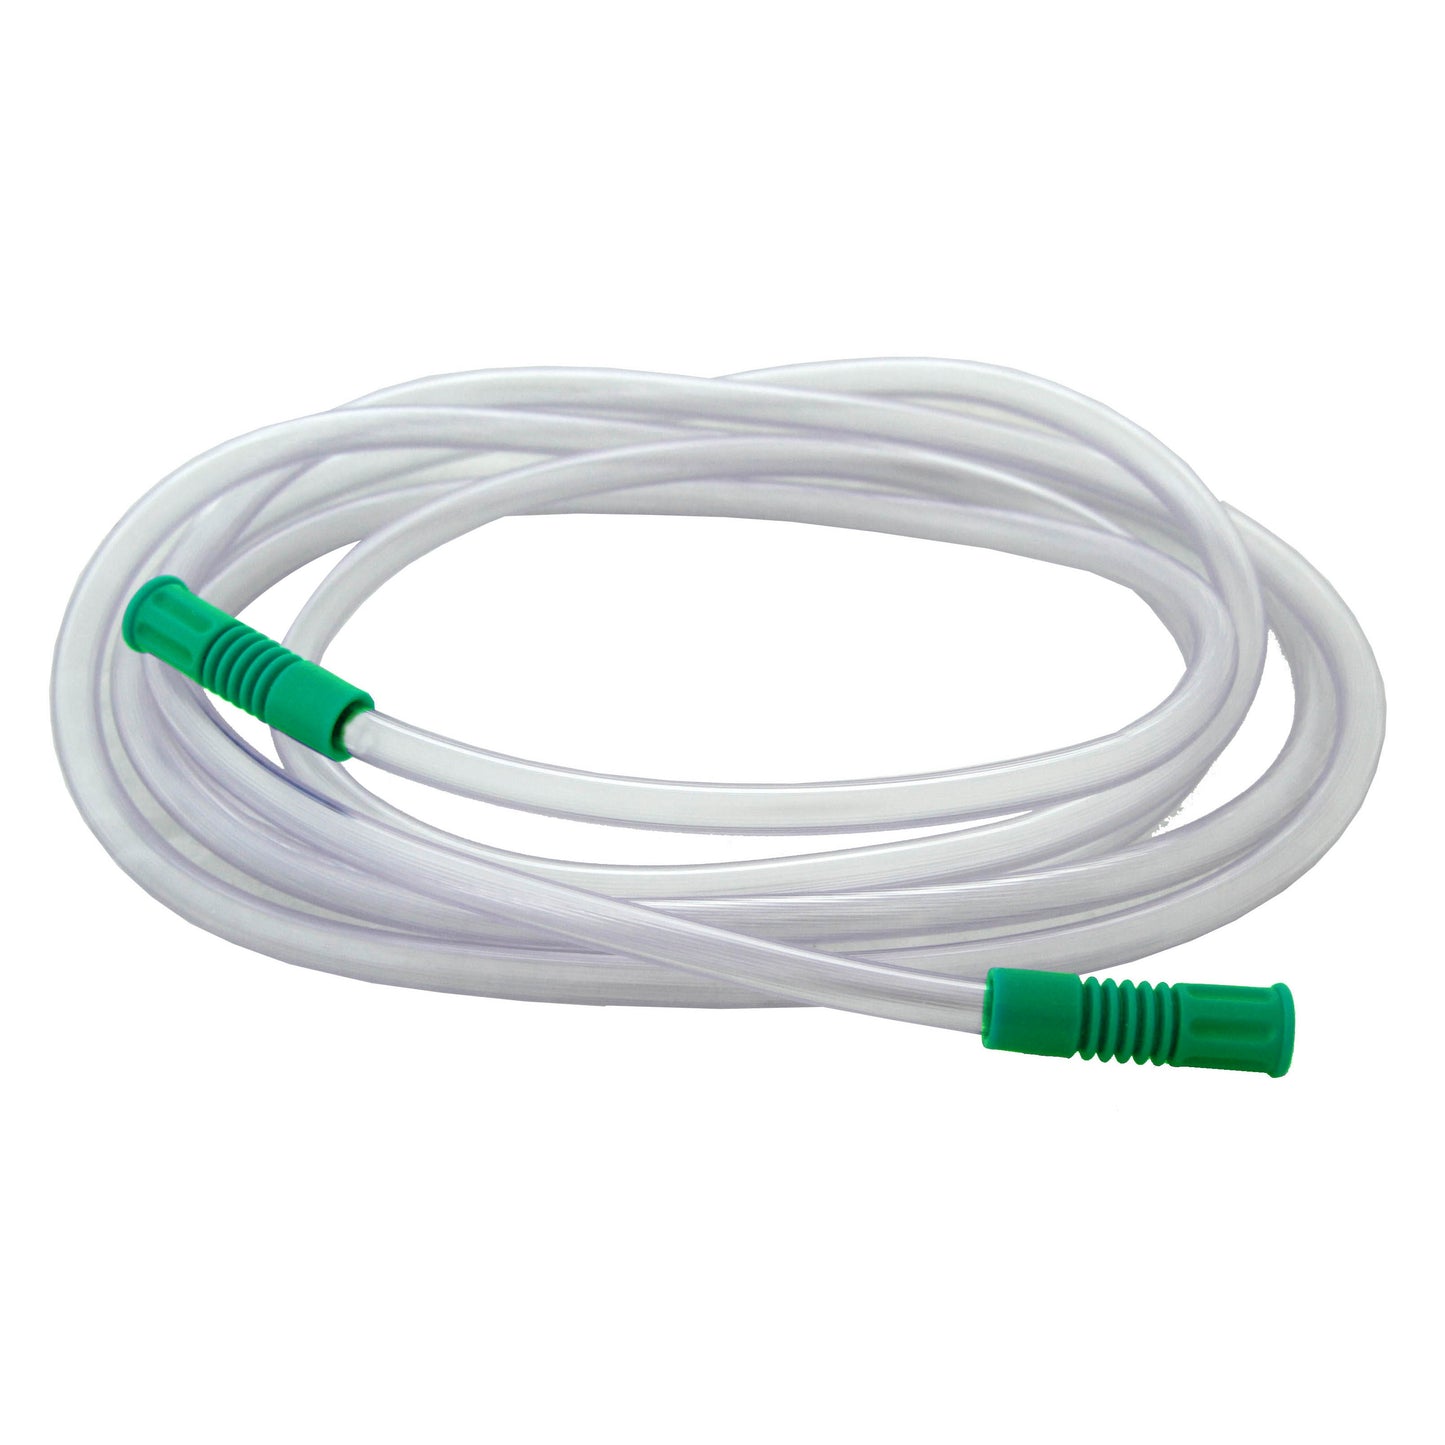 Sterile Disposable Patient Suction Tubing (2m Length, 6mm ID)